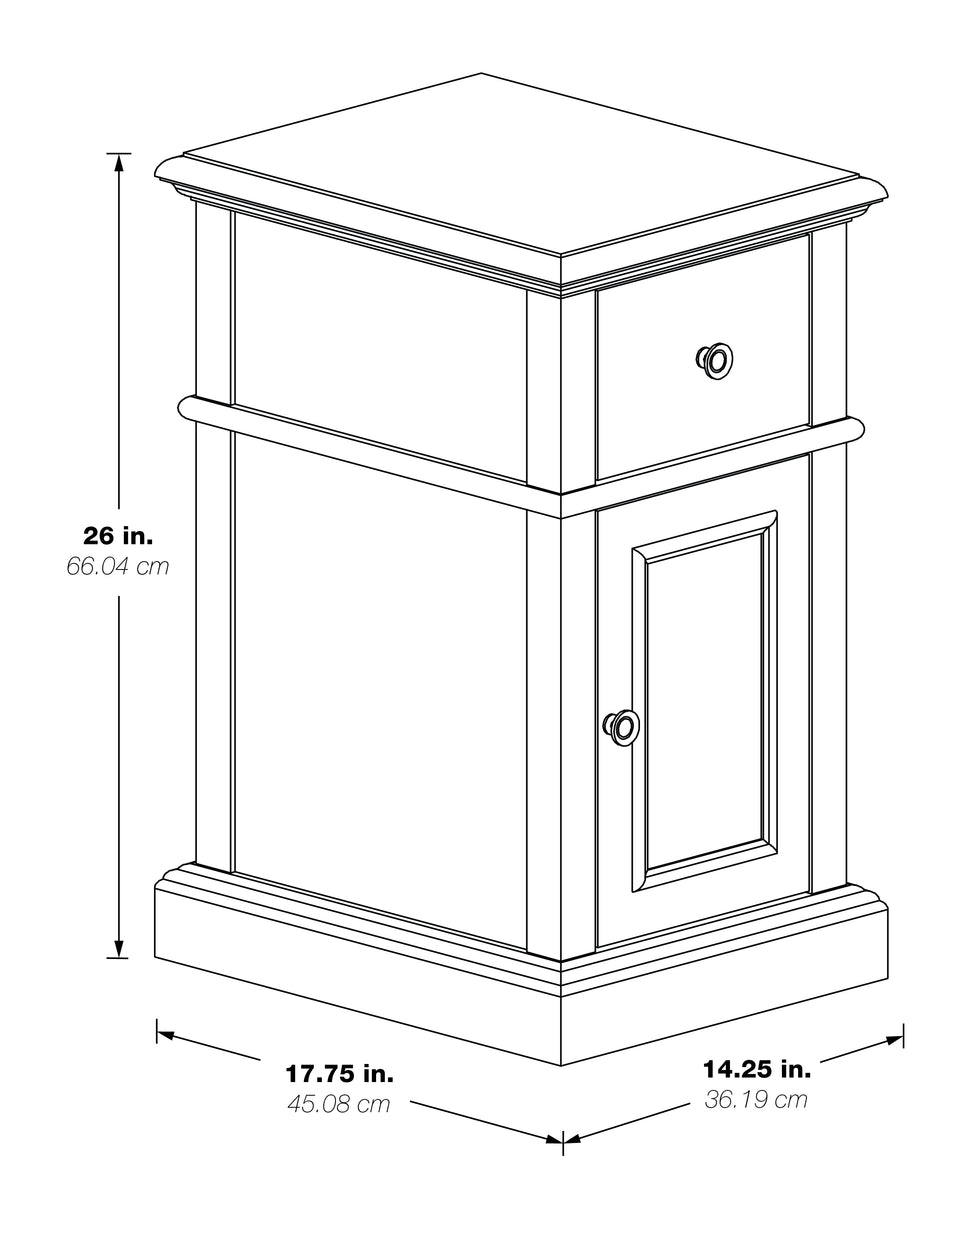 oxford side table 3d black and white schematic